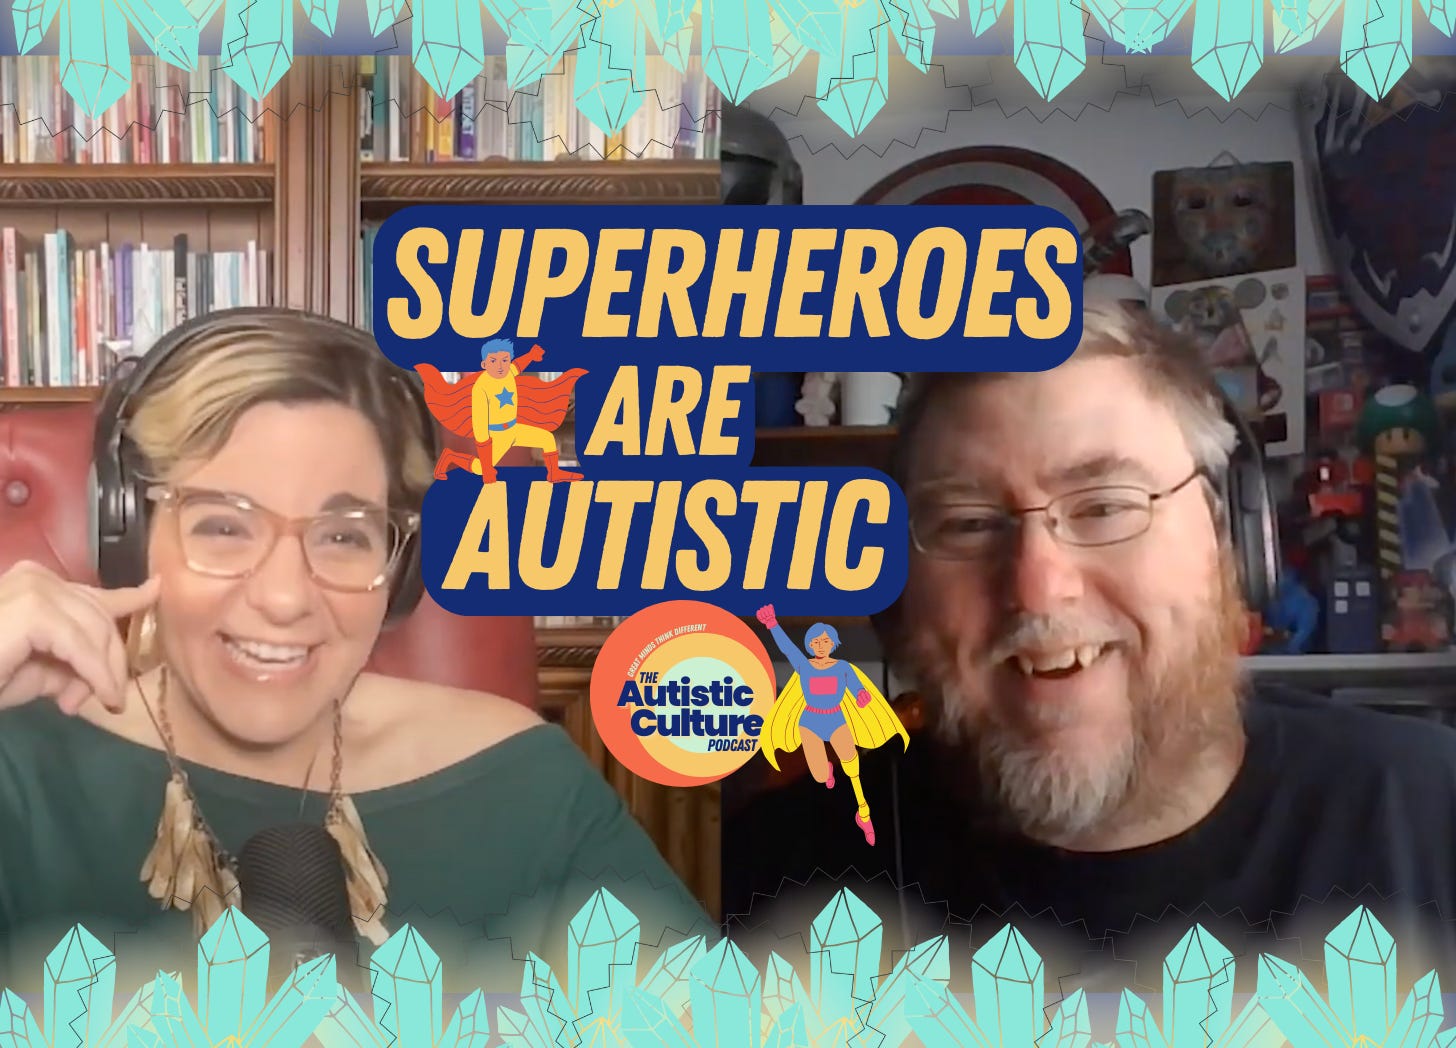 Listen to Autistic podcast hosts discuss: Superheroes are Autistic. Autism Podcast | Caped Crusaders & Autism: Unmasking a Powerful Connection!  Autistic characters from Autistic writers? Count us in!